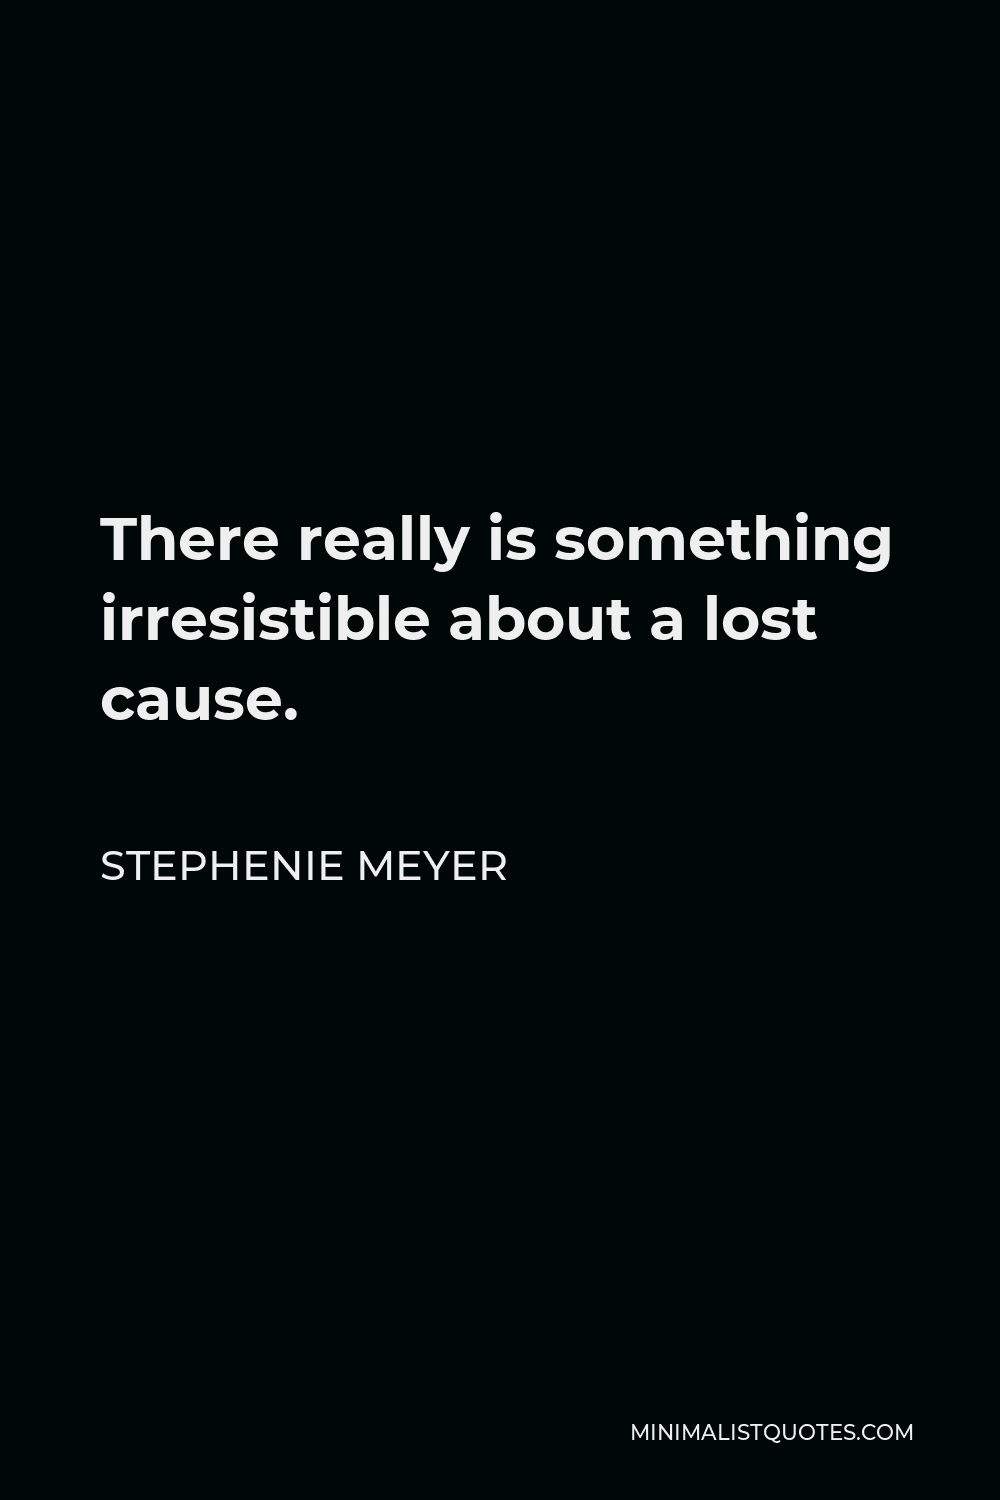 Stephenie Meyer Quote - There really is something irresistible about a lost cause.